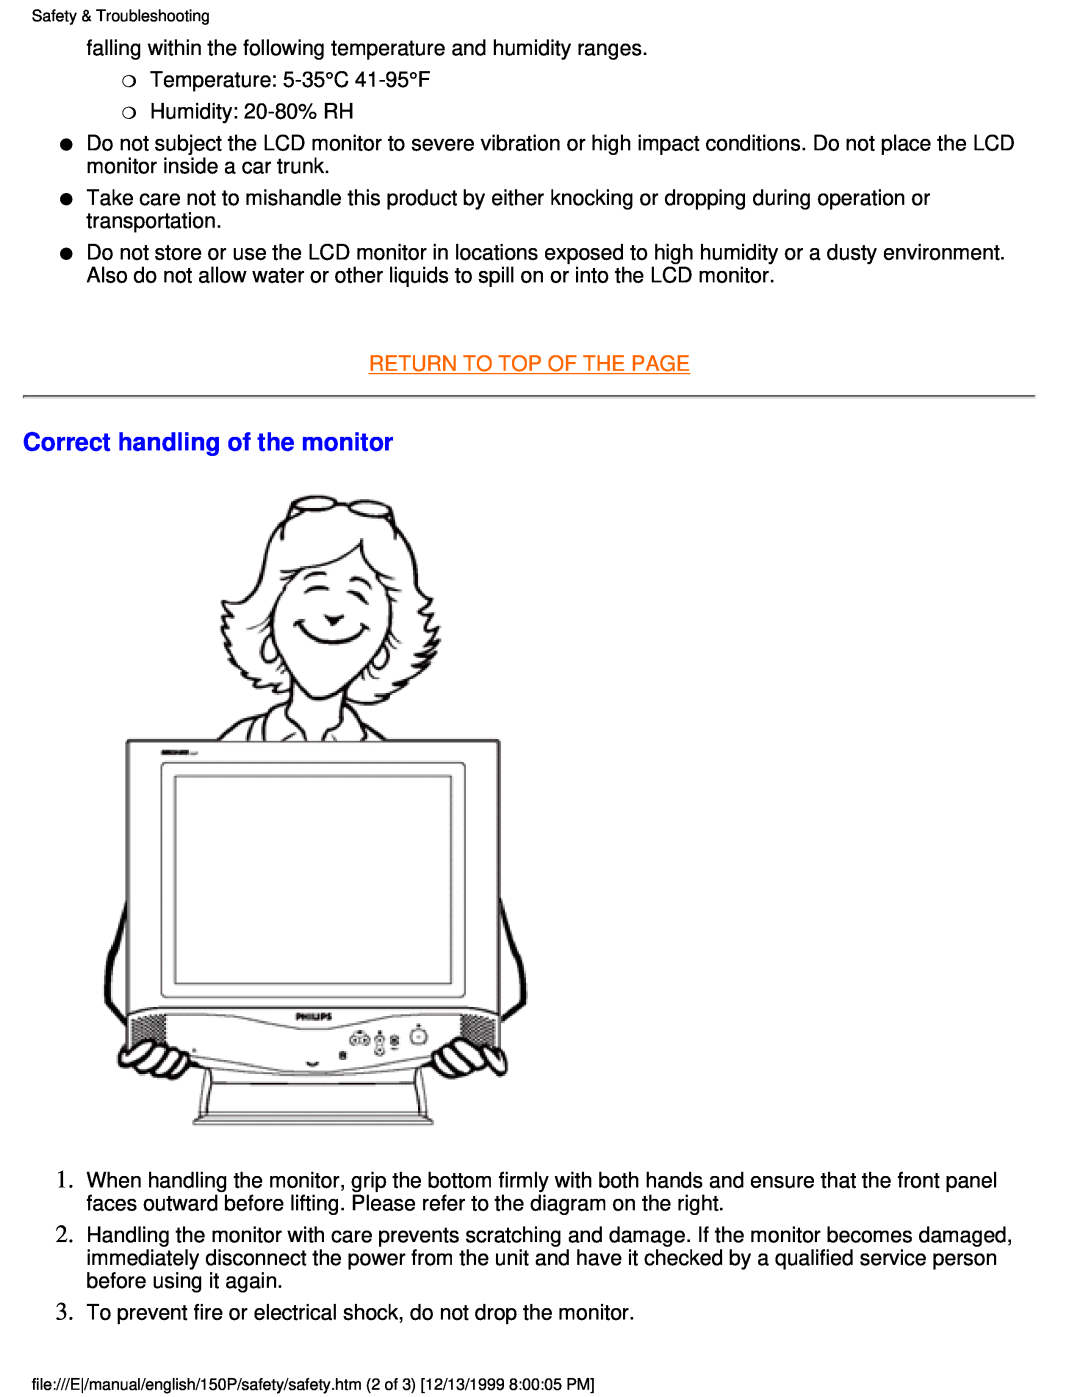 Philips 150P user manual Correct handling of the monitor, Return To Top Of The Page 